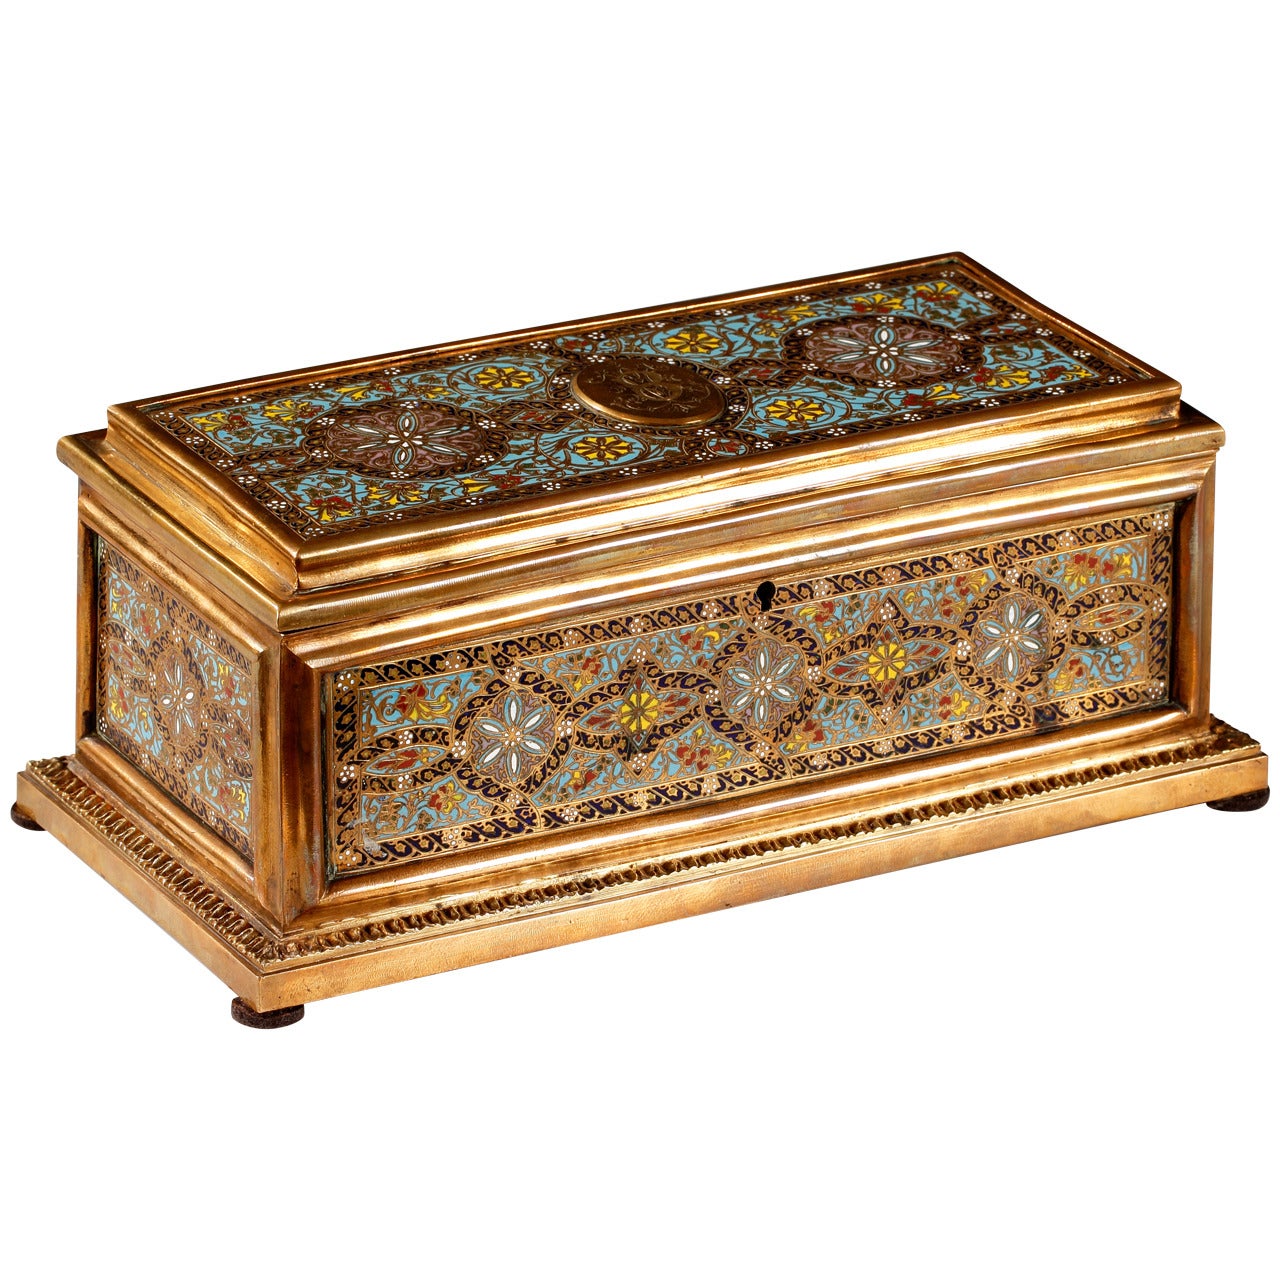 Enameled bronze box by Tahan, circa 1870 For Sale